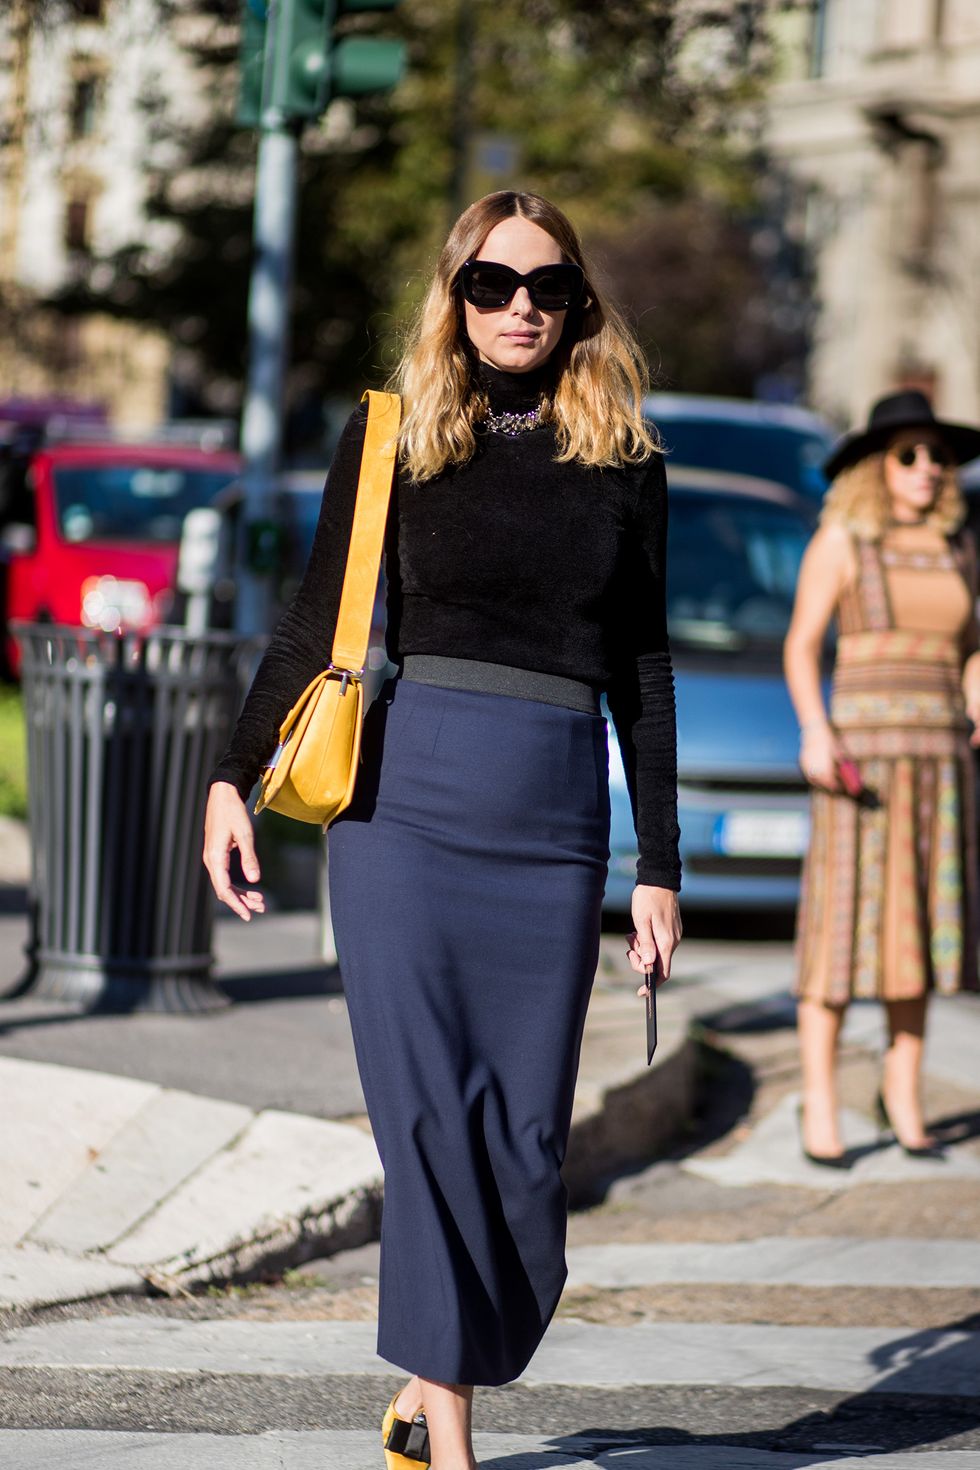 How to Pull off Pencil Skirt Outfits Like a Style Icon